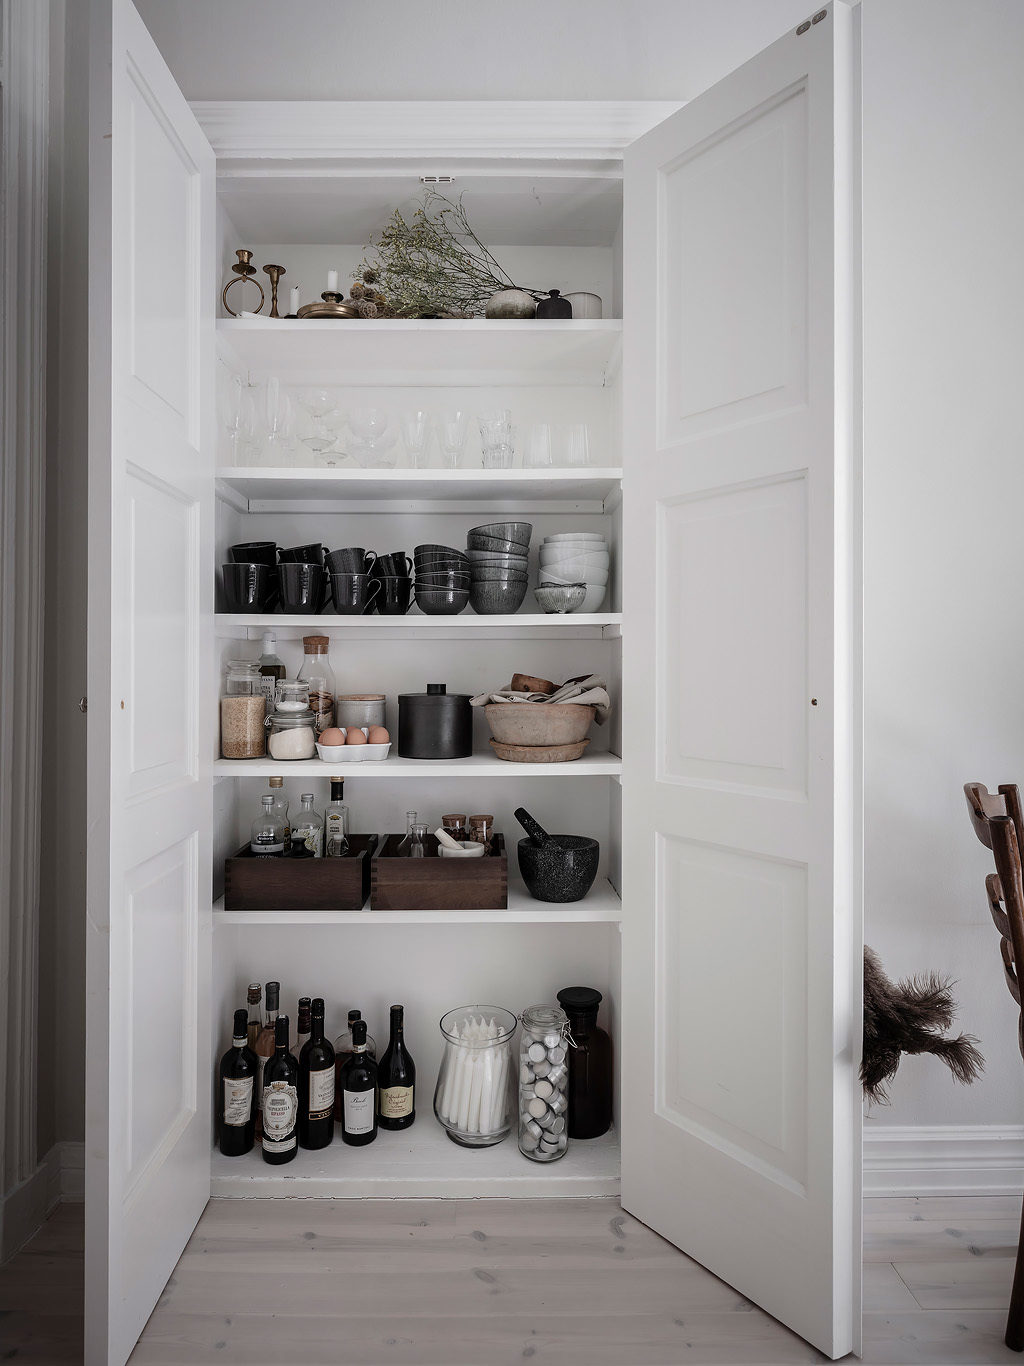 Make the pantry feel "fancy" by corralling like items in containers and boxes.